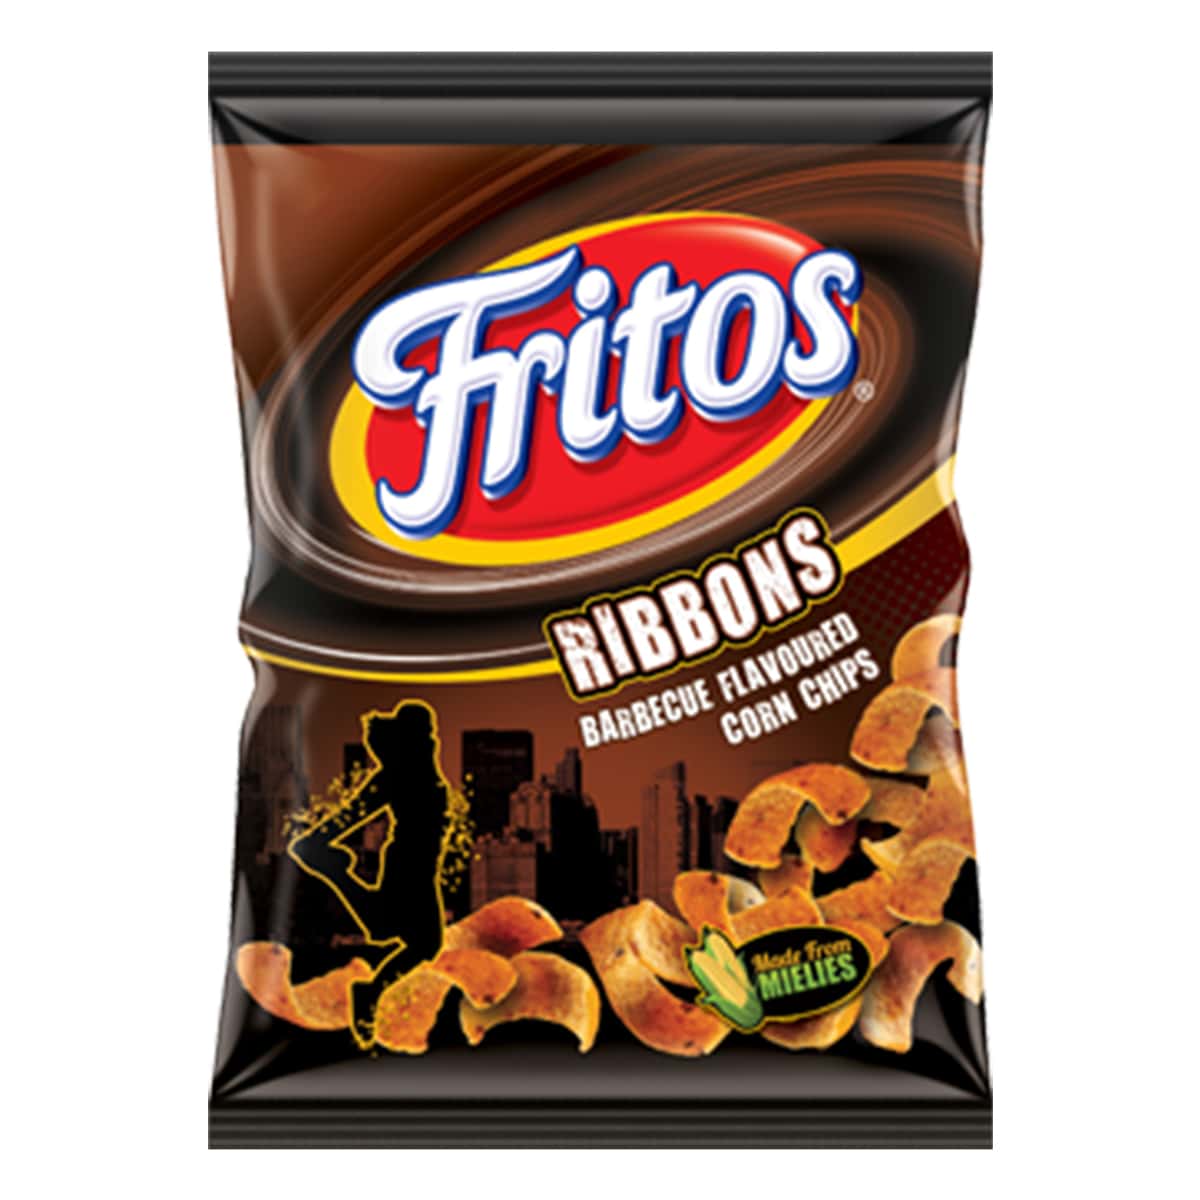 Buy Simba Fritos Ribbons Barbecue Flavoured Corn Chips - 120 gm